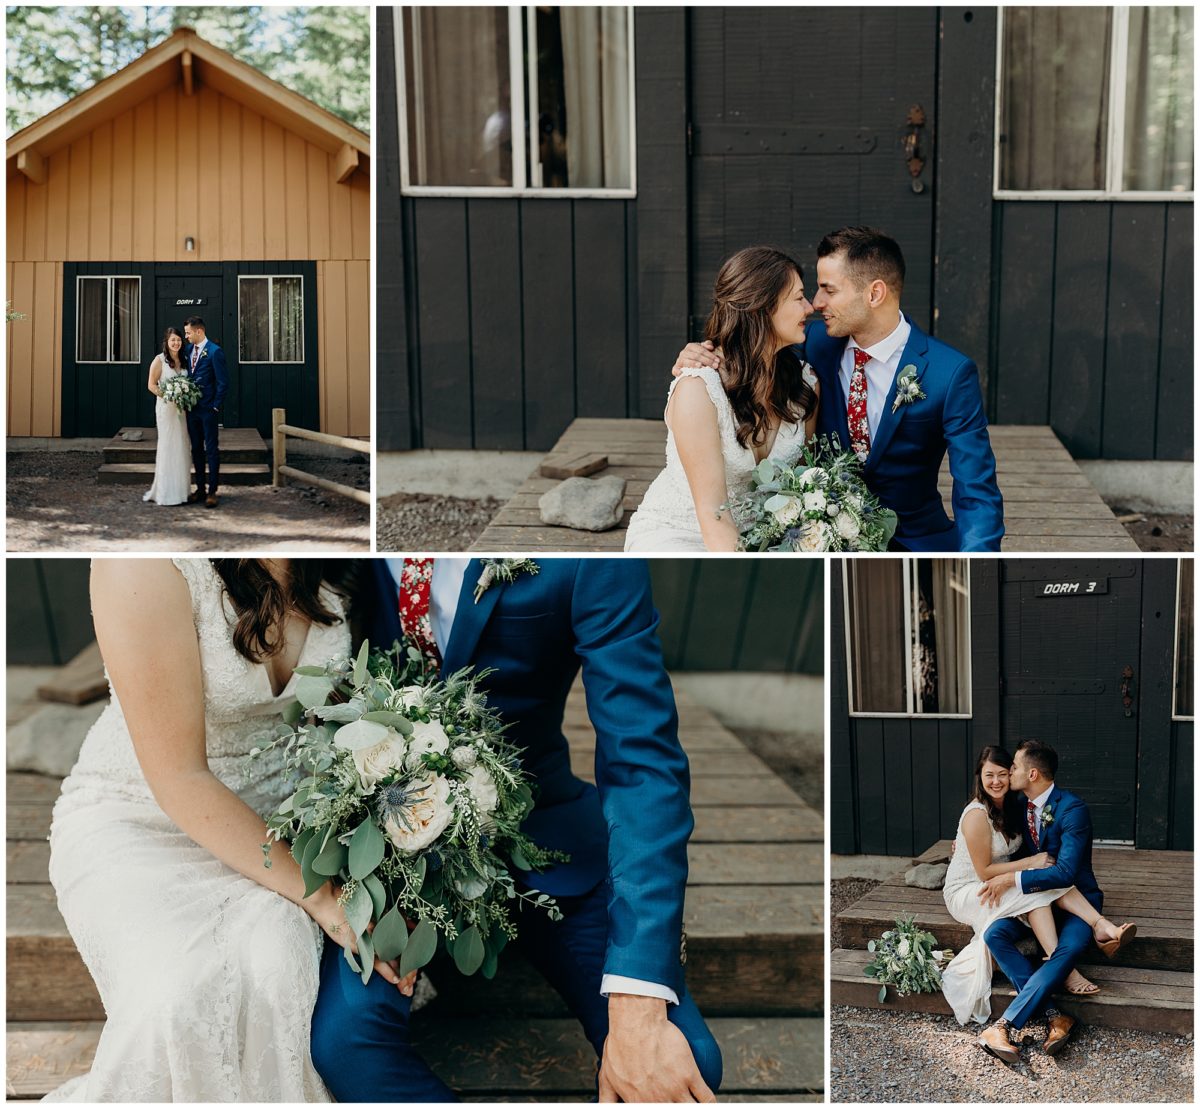 This cute couple is about to get hitched! Photography by Portland Wedding photographer, Briana Morrison